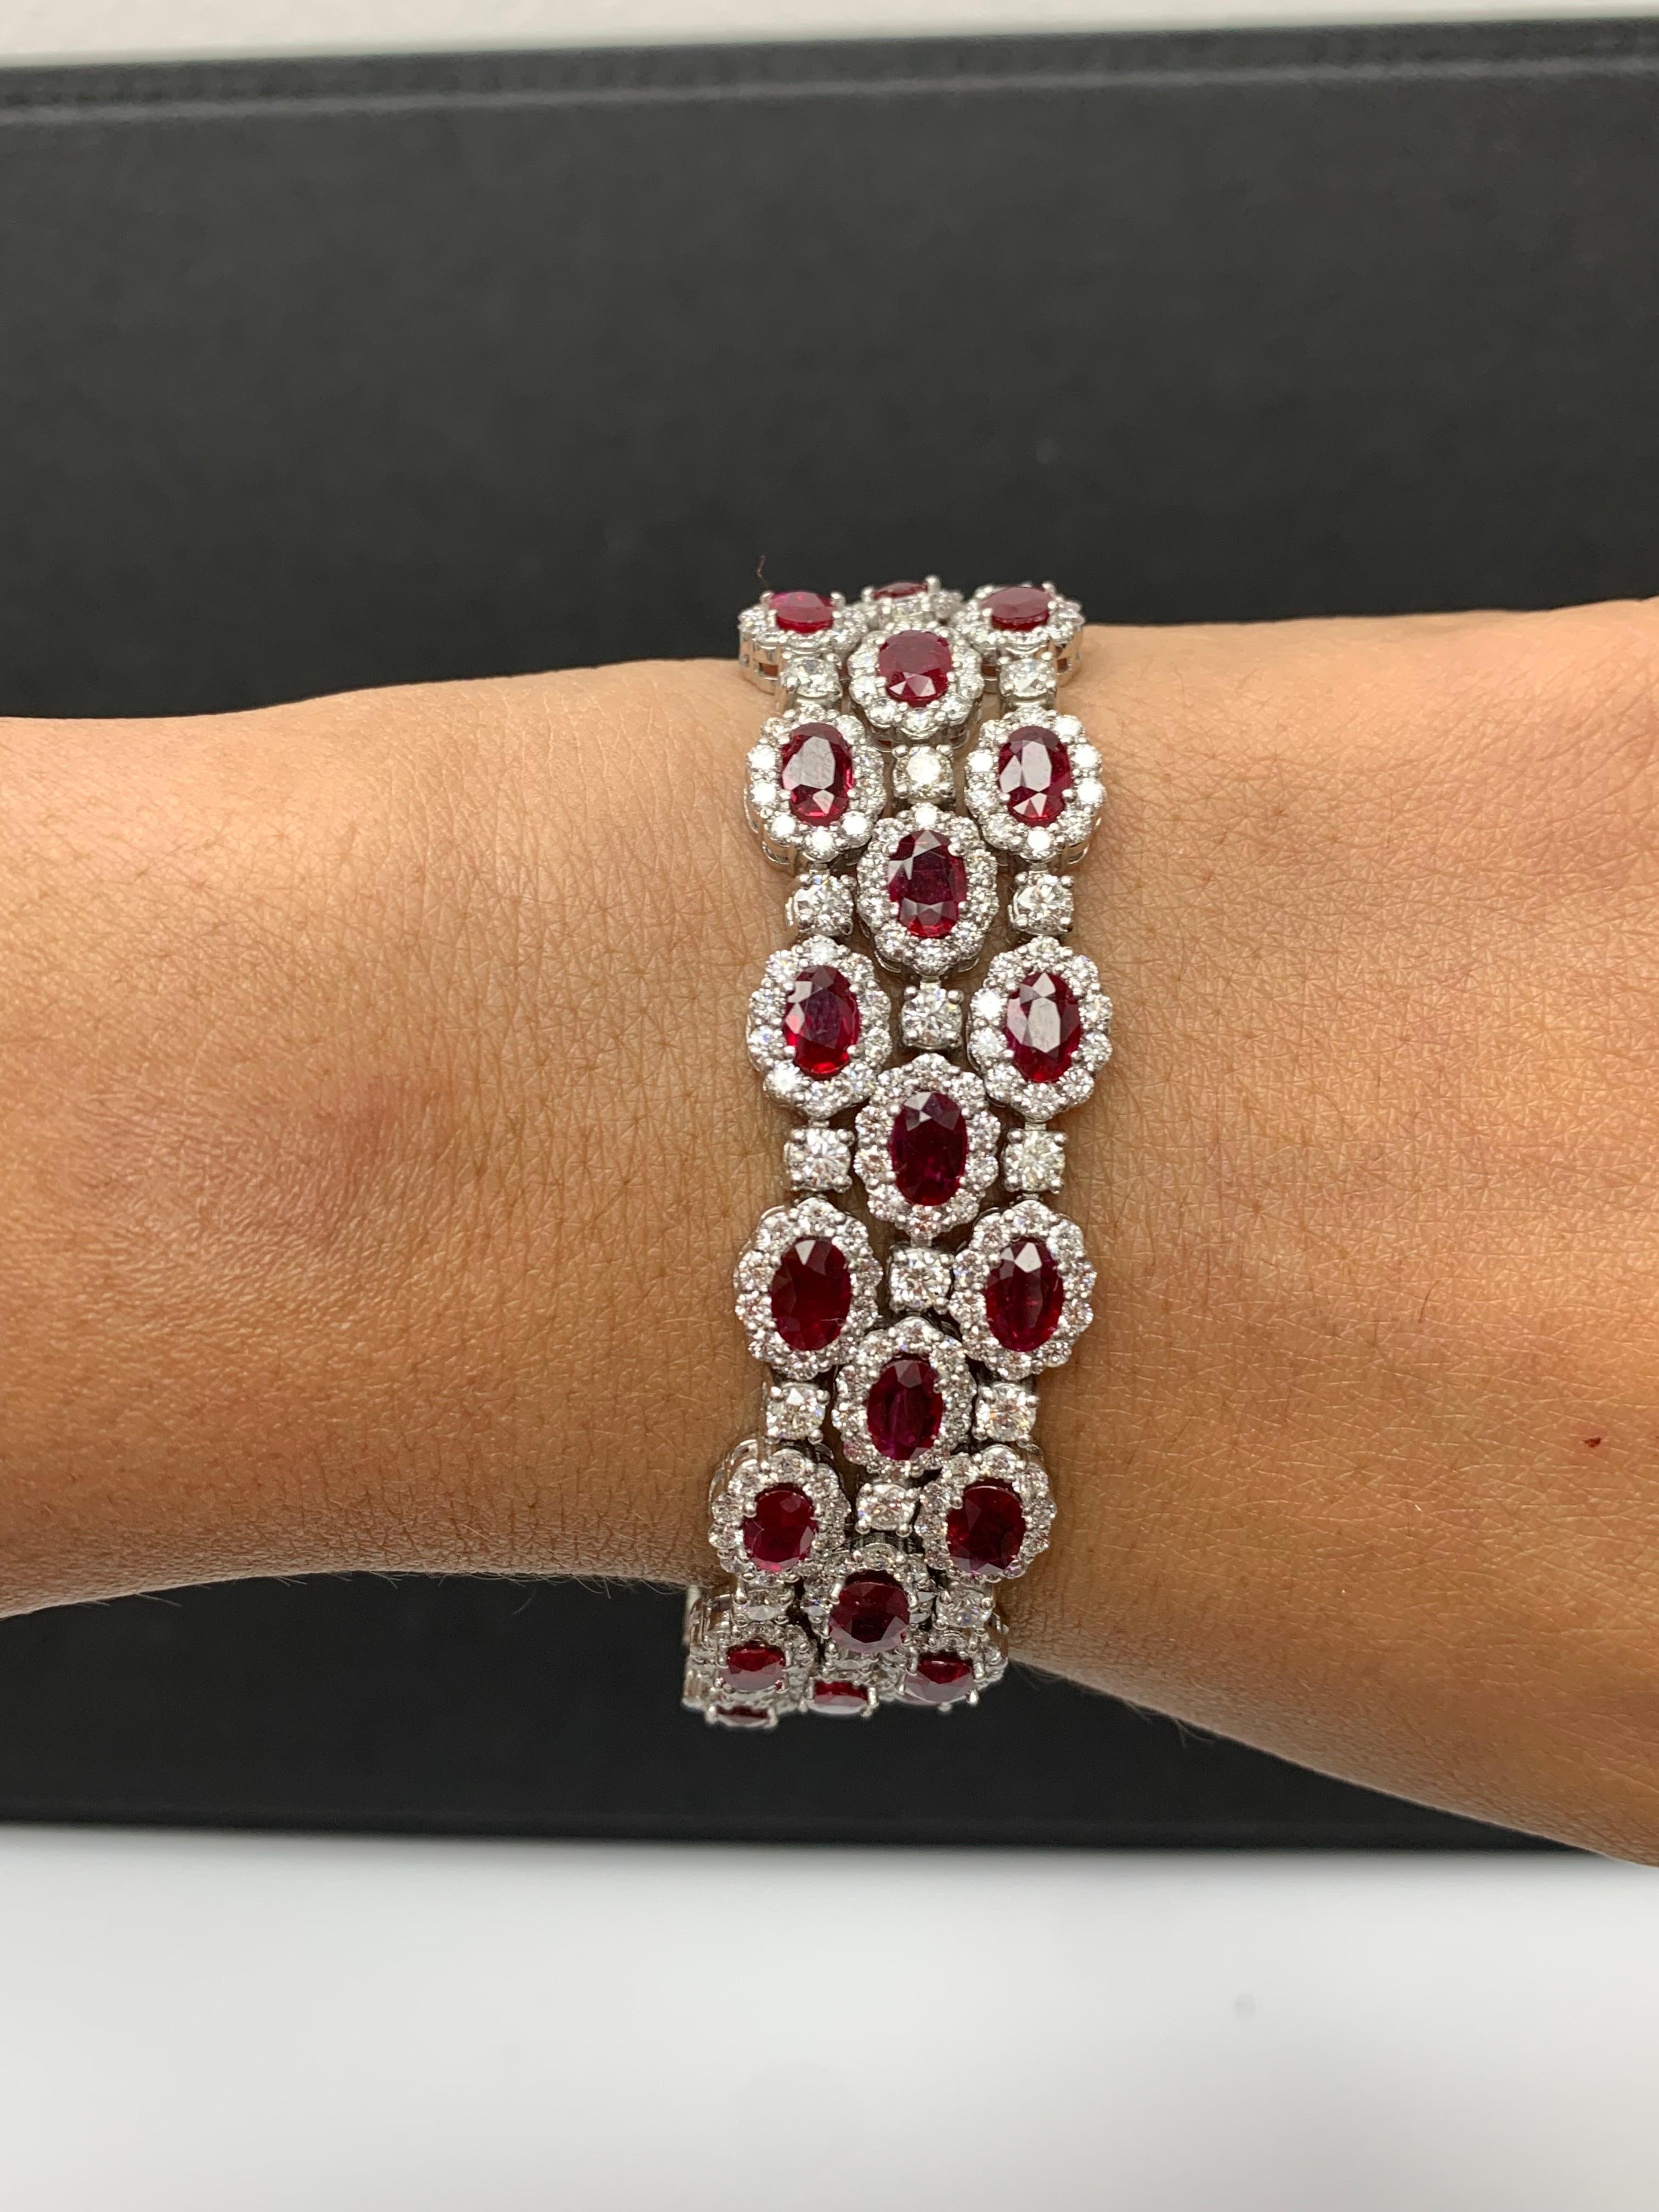 A beautiful Ruby and Diamond 3-row bracelet showcasing color-rich Rubies, surrounded by a single row of brilliant round diamonds. 42 Oval cut lush red rubies weigh 18.01 carats total; 420 accent diamonds weigh 16.44 carats total. Made in 14k white